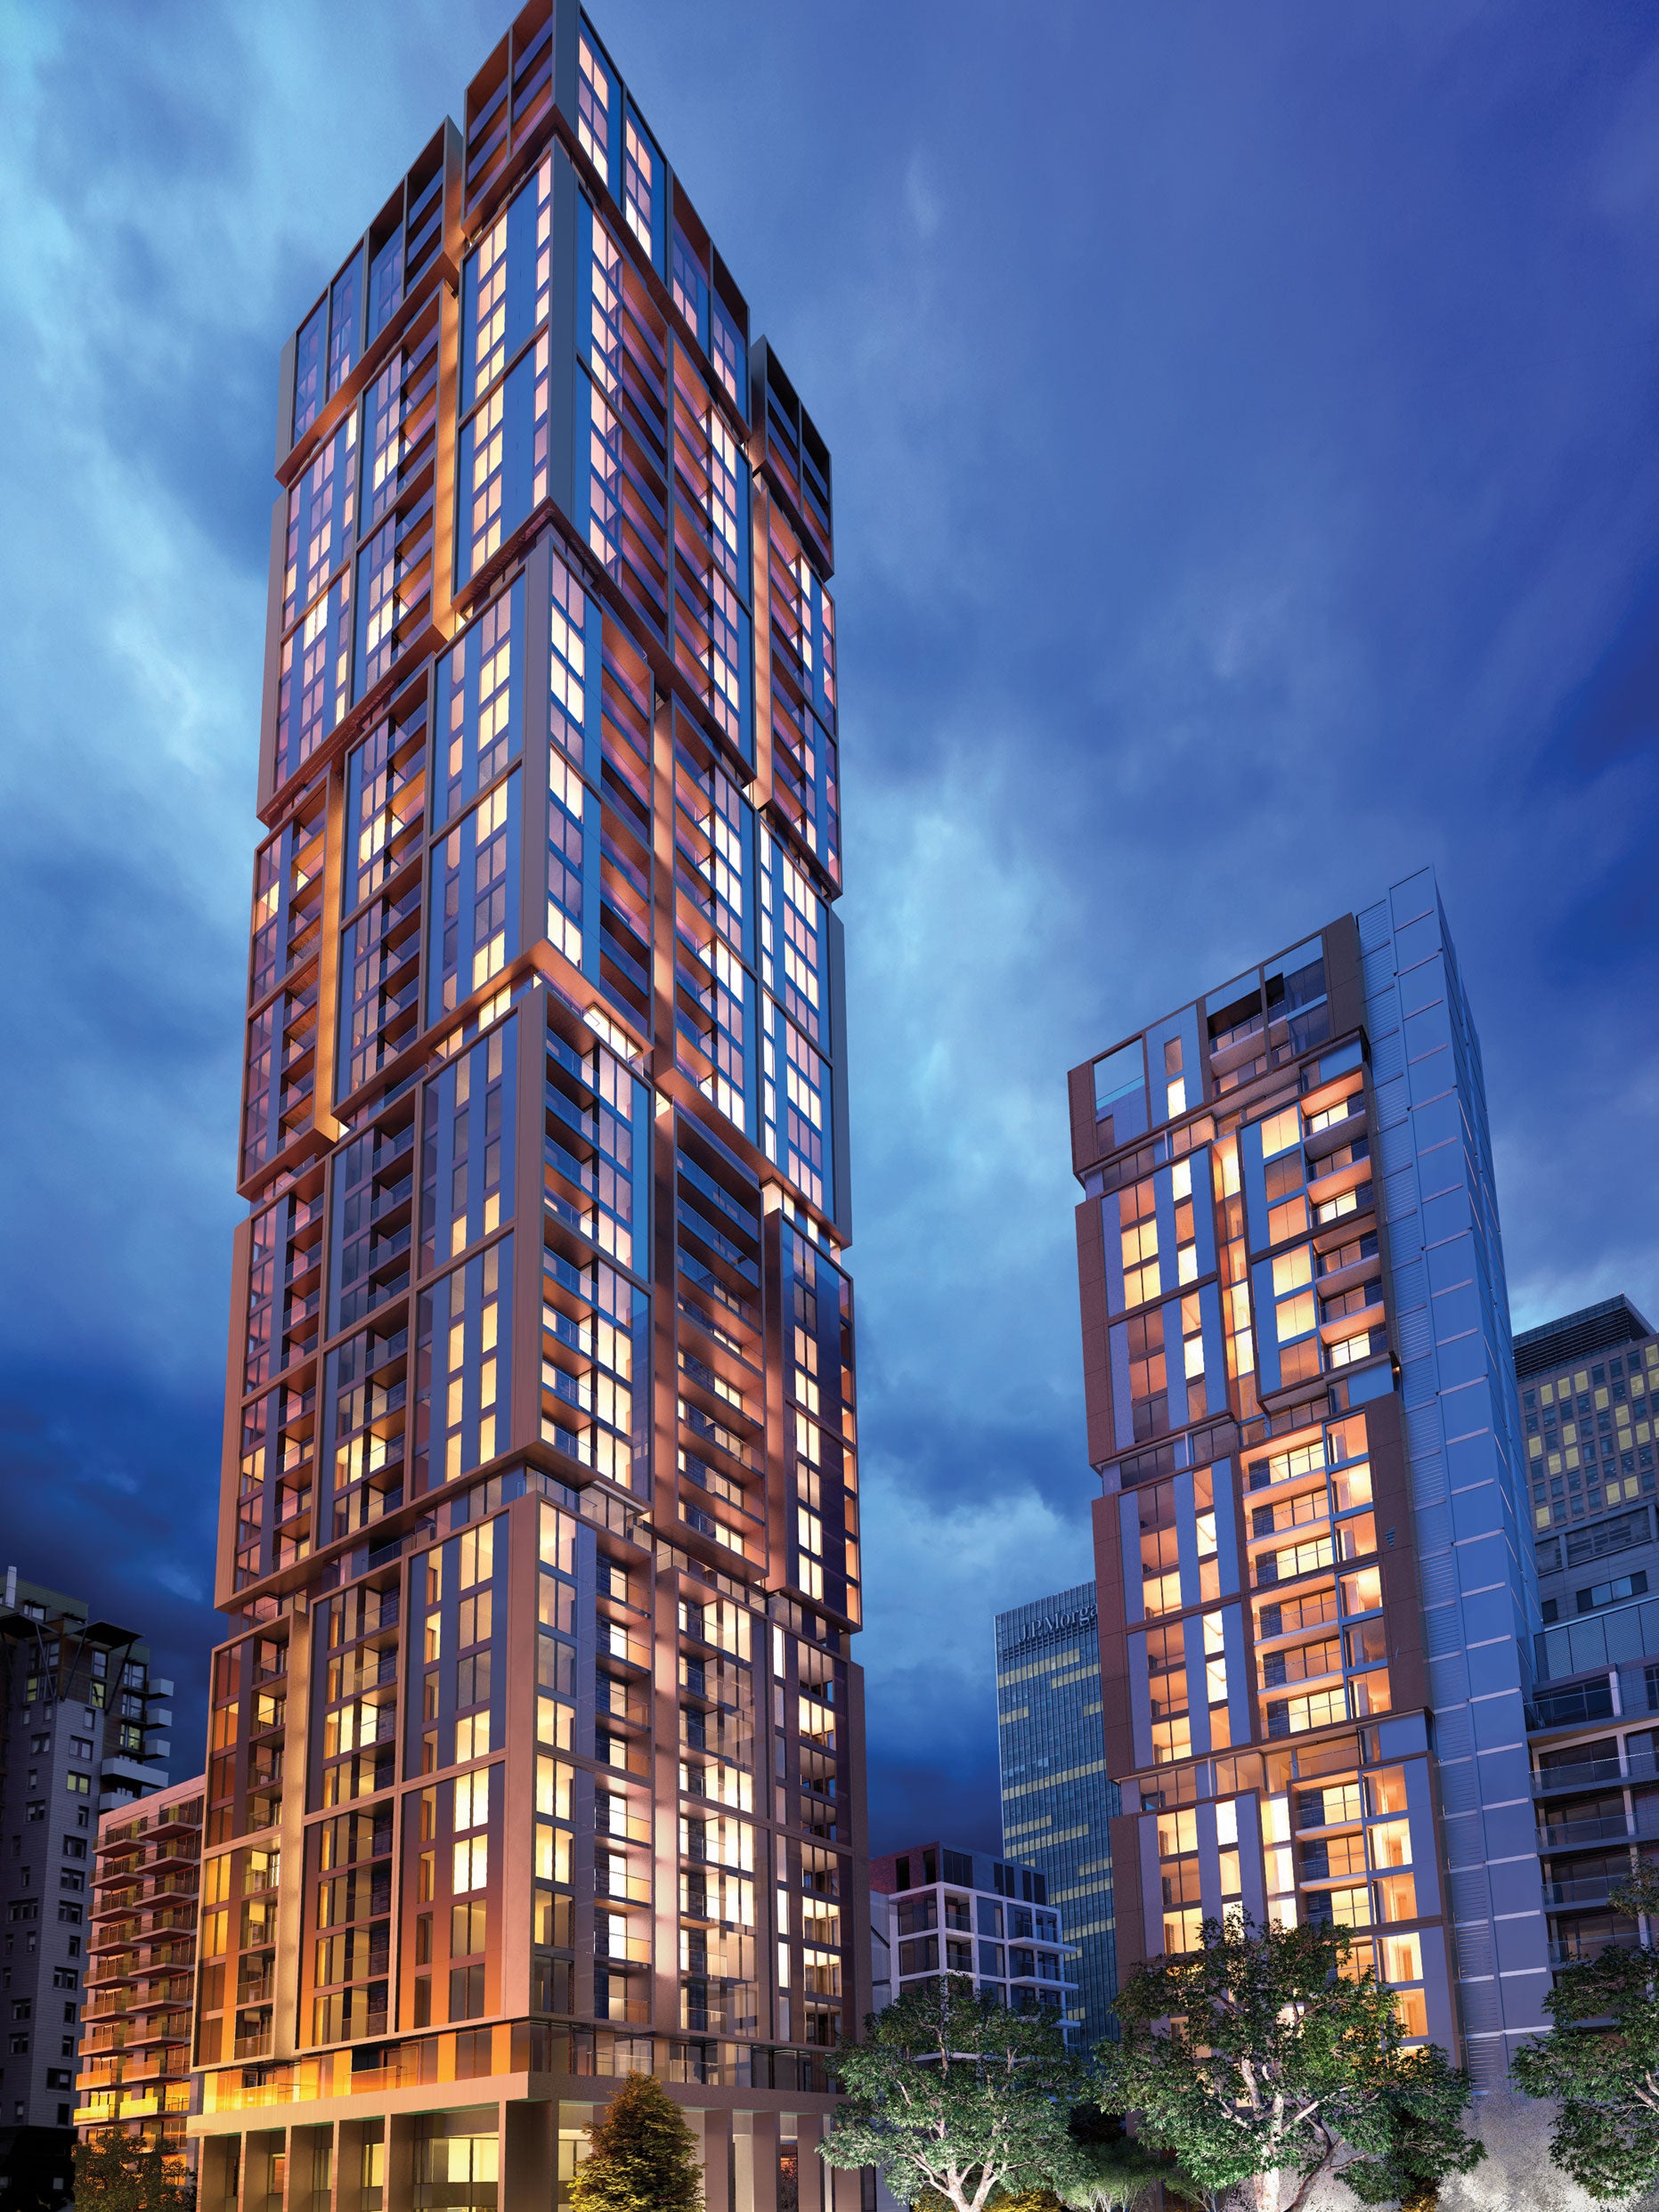 Buyers queued on the streets for 36 hours to secure one of the 230 properties in South Quay’s Maine Tower, Canary Wharf